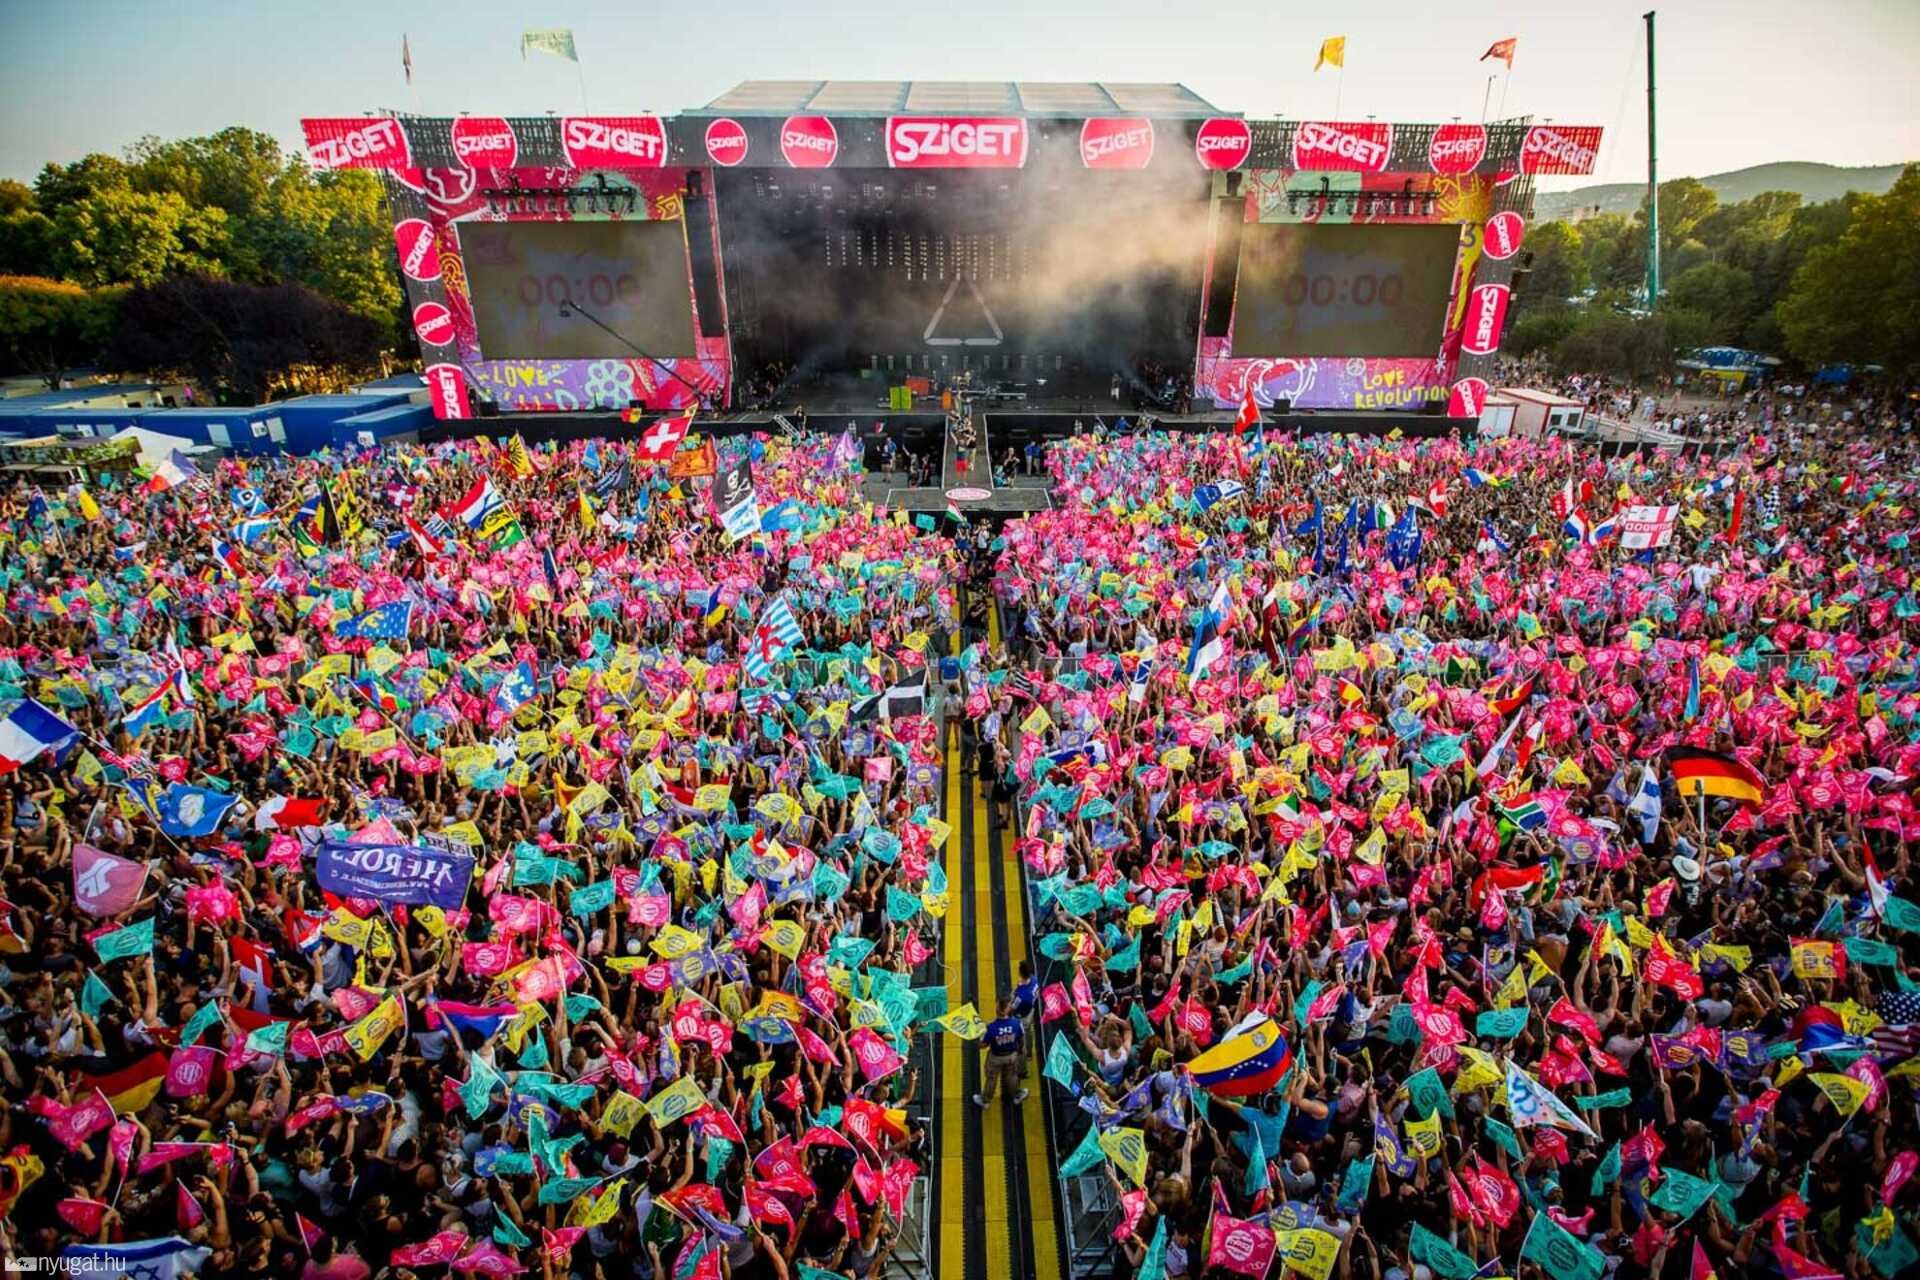 Festival Guide: Main Music Venues at Sziget